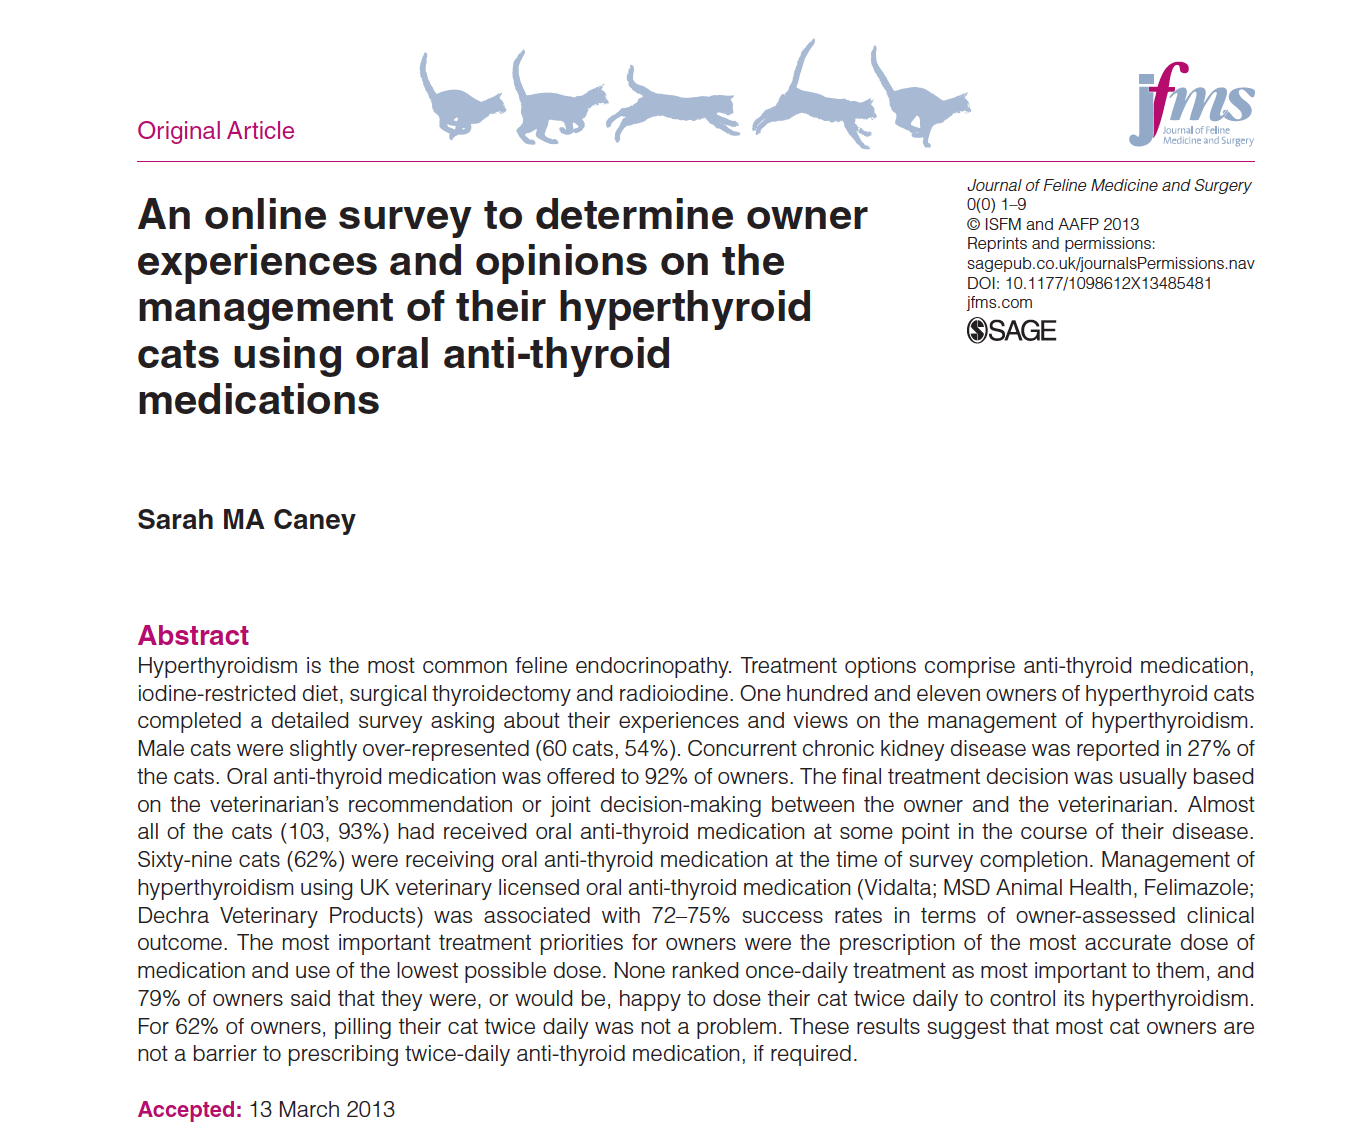 An online survey to determine owner experiences and opinions on the management of their hyperthyroid cats using oral anti-thyroid medications